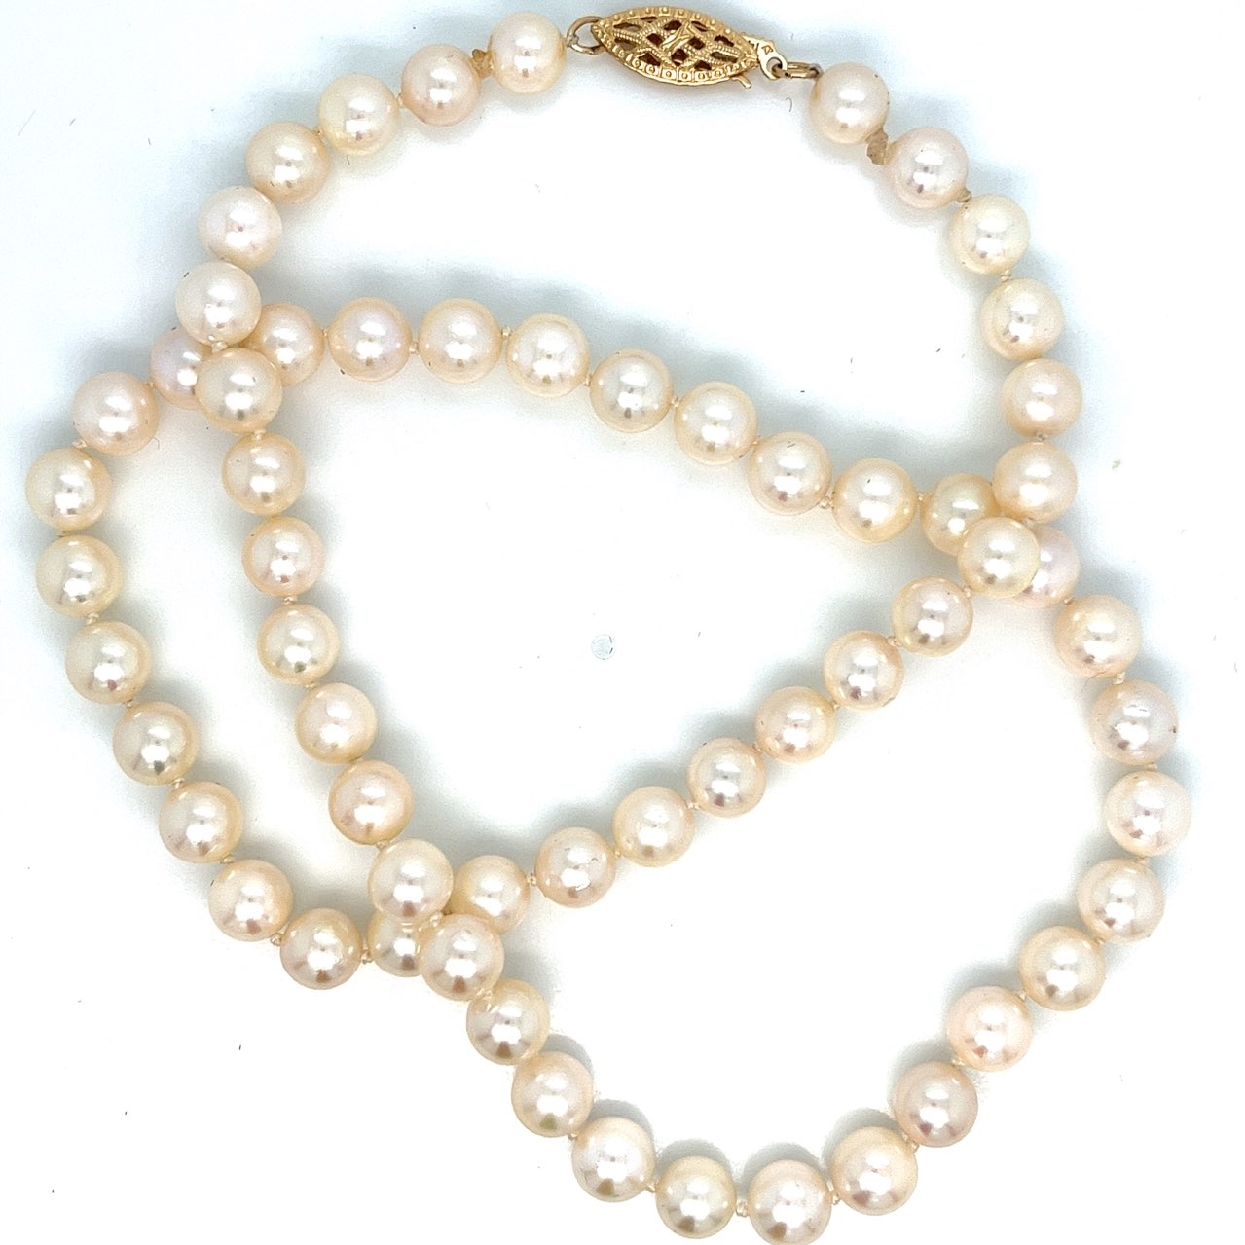 6-6.5mm Round White Pearls with Slight Pink Luster and 14K Yellow Gold Clasp 
16 Inch Necklace